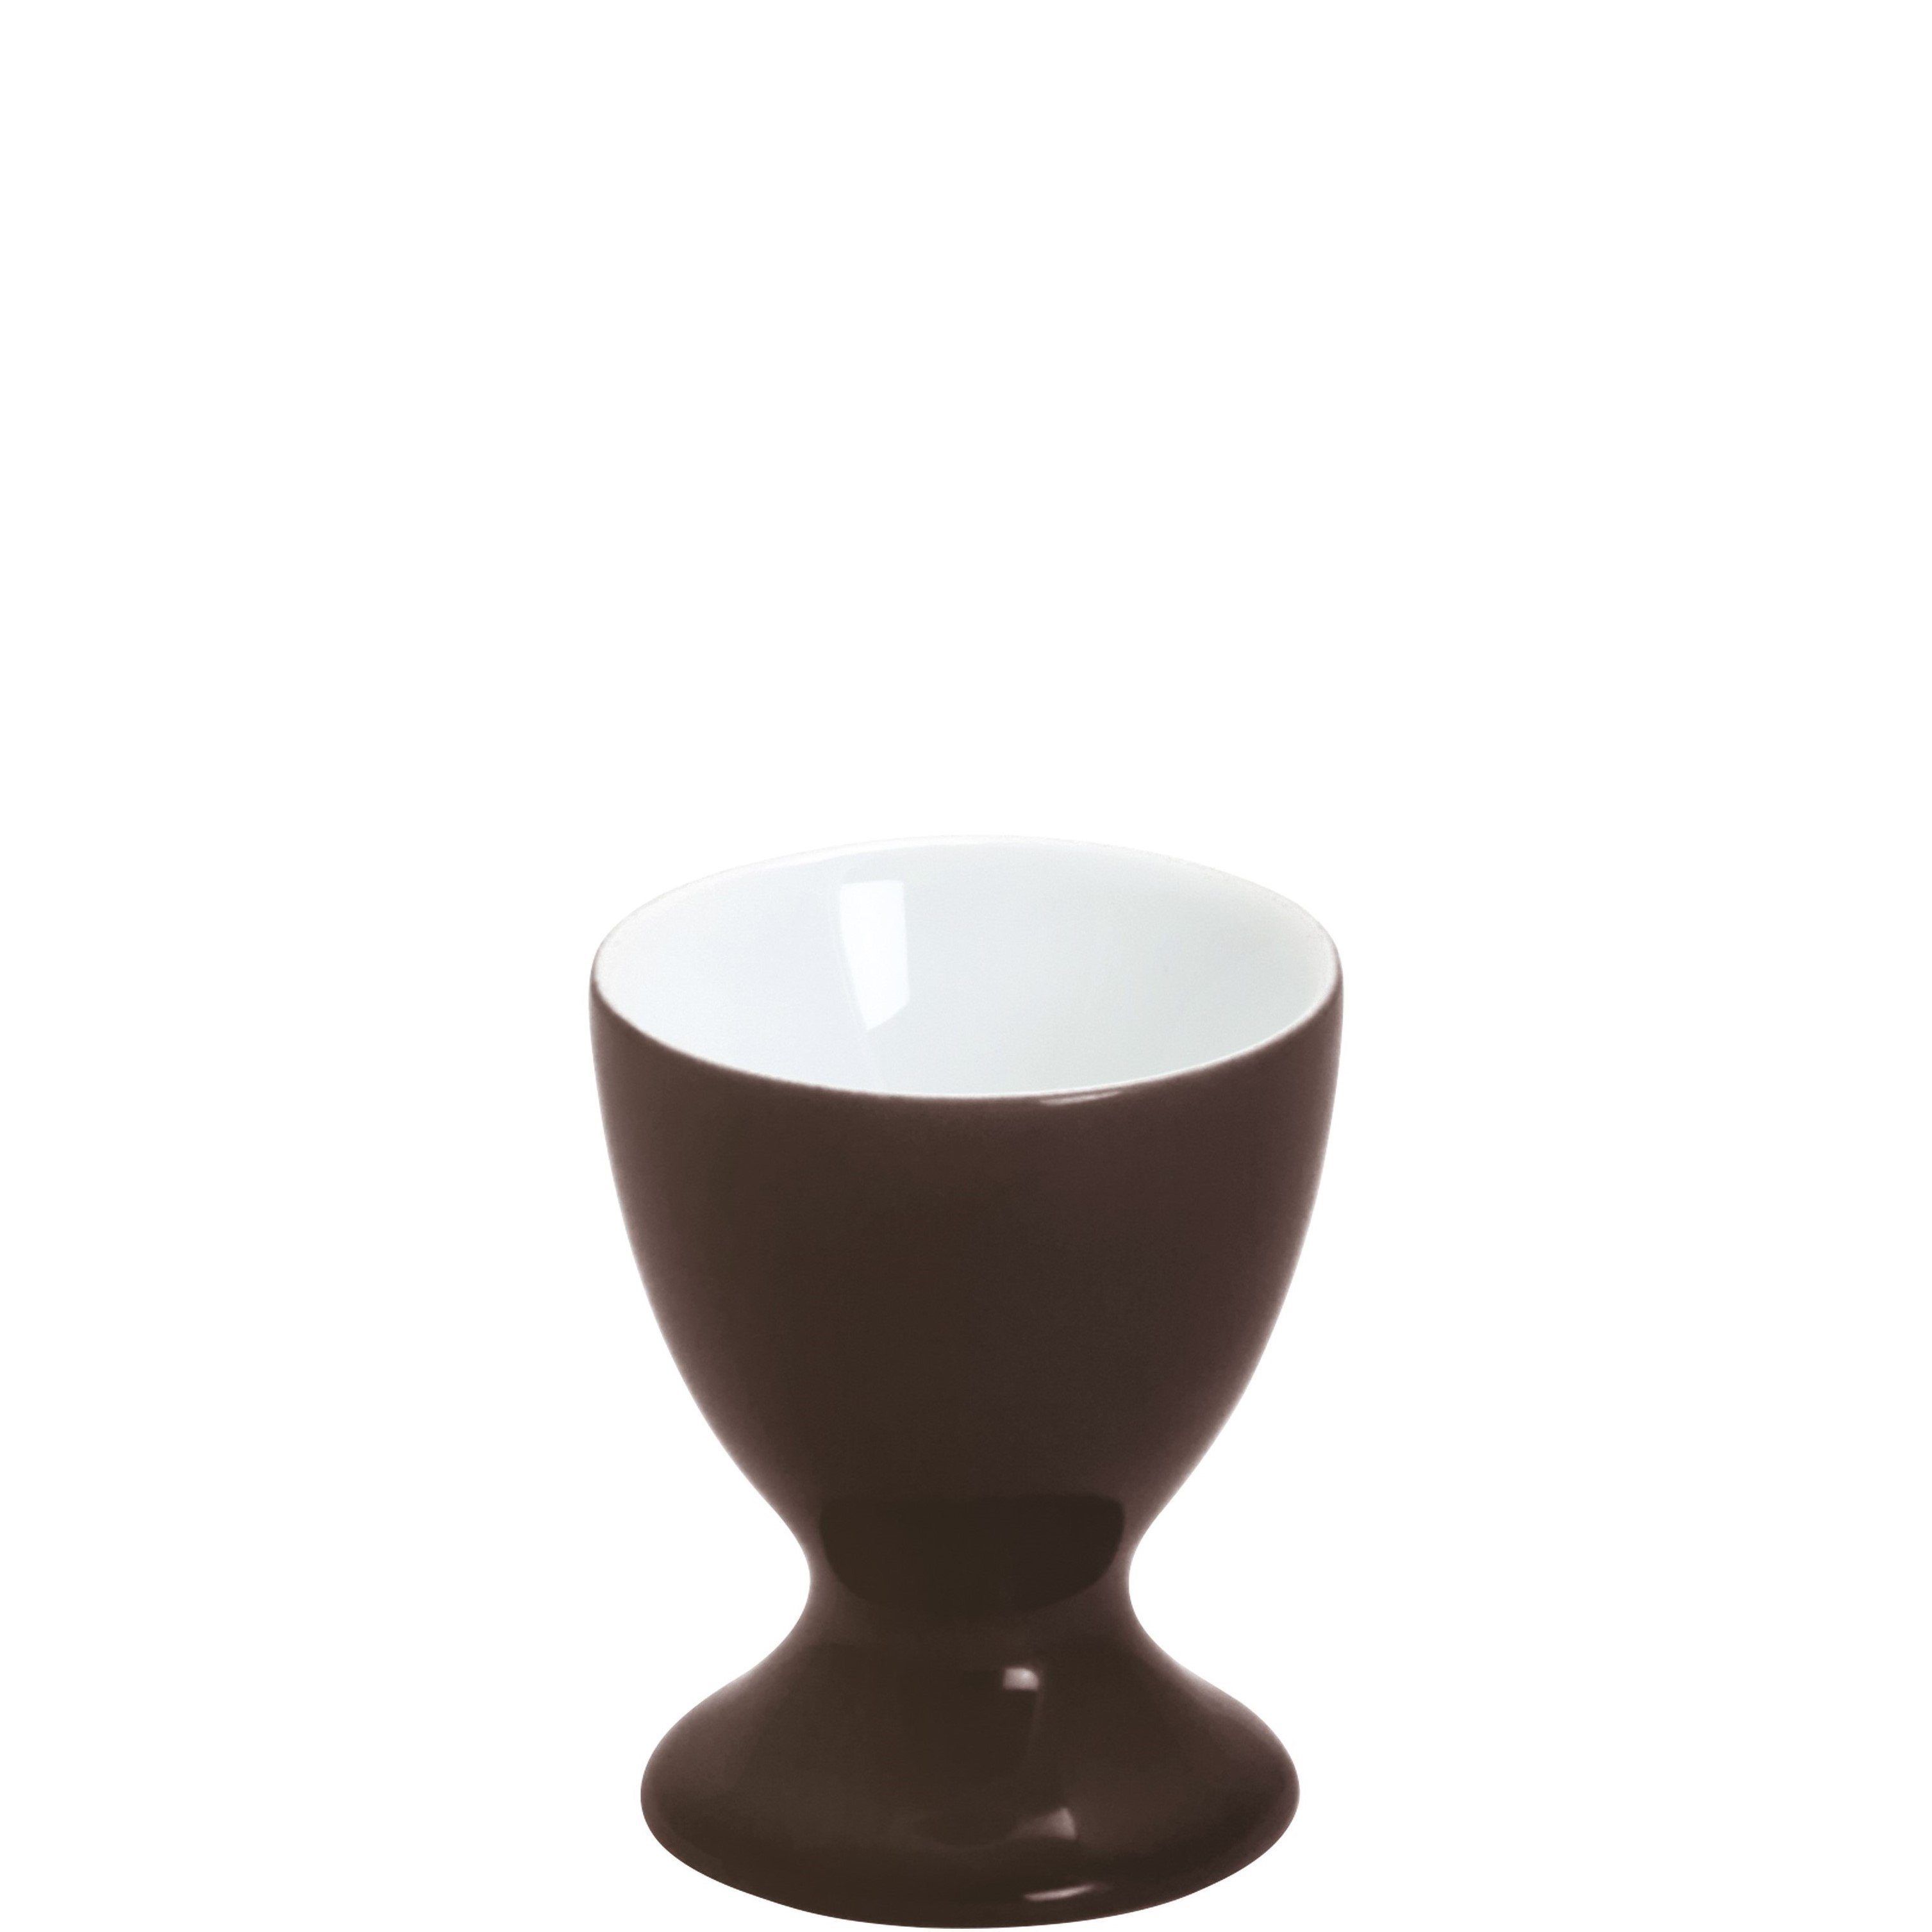 Kahla Eierbecher mit Fuß, Pronto Colore, Made in Germany chocolate brown